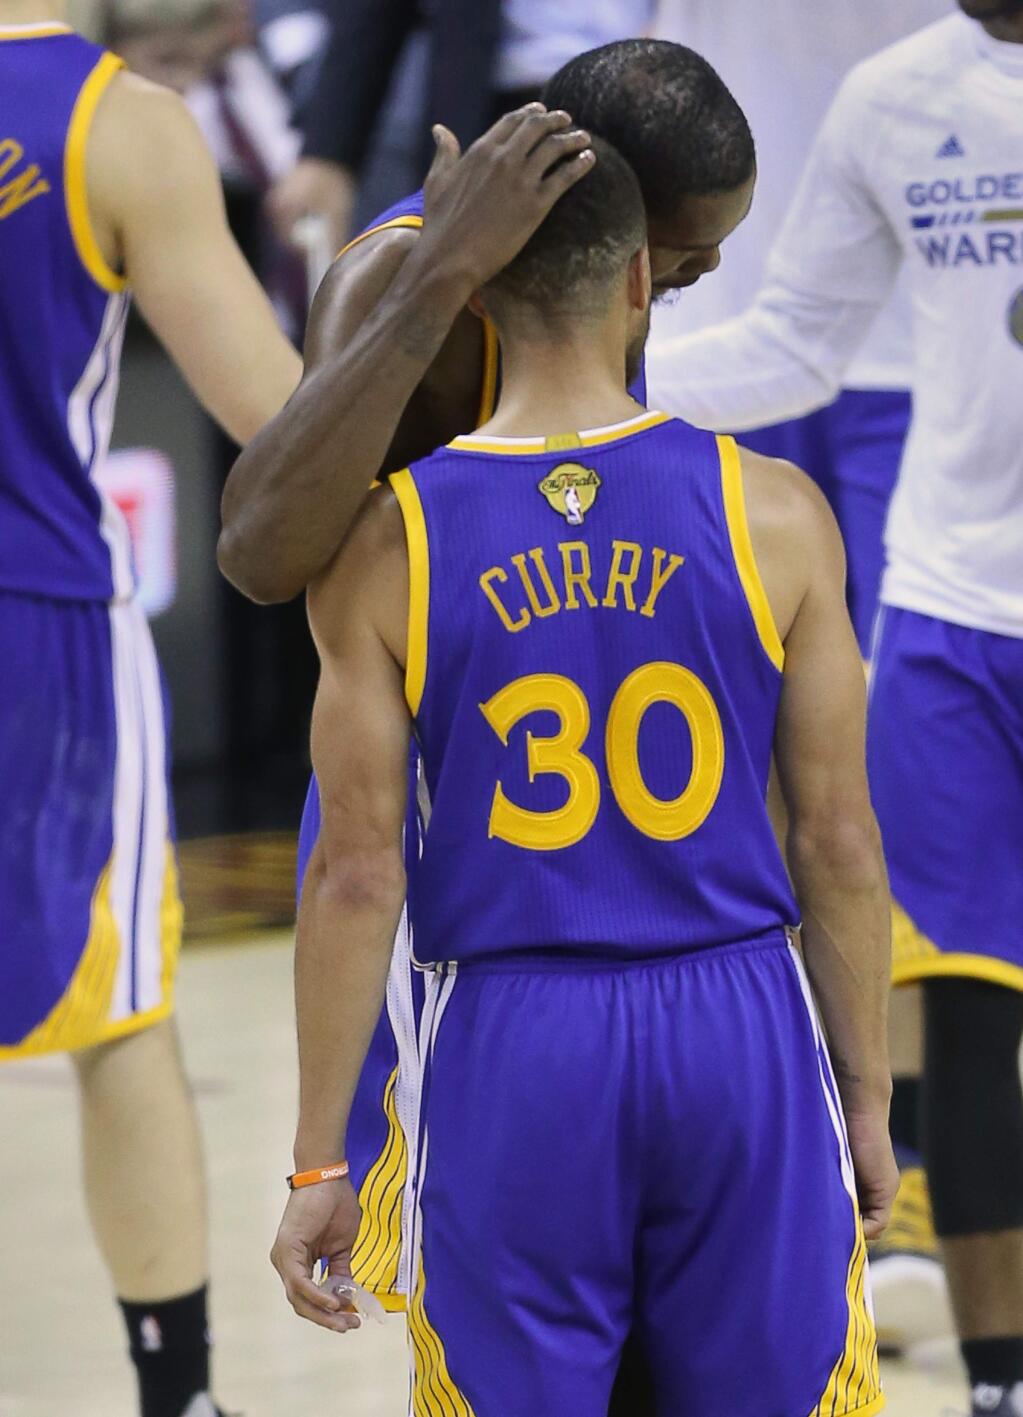 Golden State Warriors forward Kevin Durant hugs Golden State Warriors guard Stephen Curry after Curry hit his free throws at the end of the fourth quarter against the Cleveland Cavaliers, during Game 3 of the NBA Finals in Cleveland on Wednesday, June 7, 2017. The Warriors defeated the Cavaliers 118-113.(Christopher Chung/ The Press Democrat)